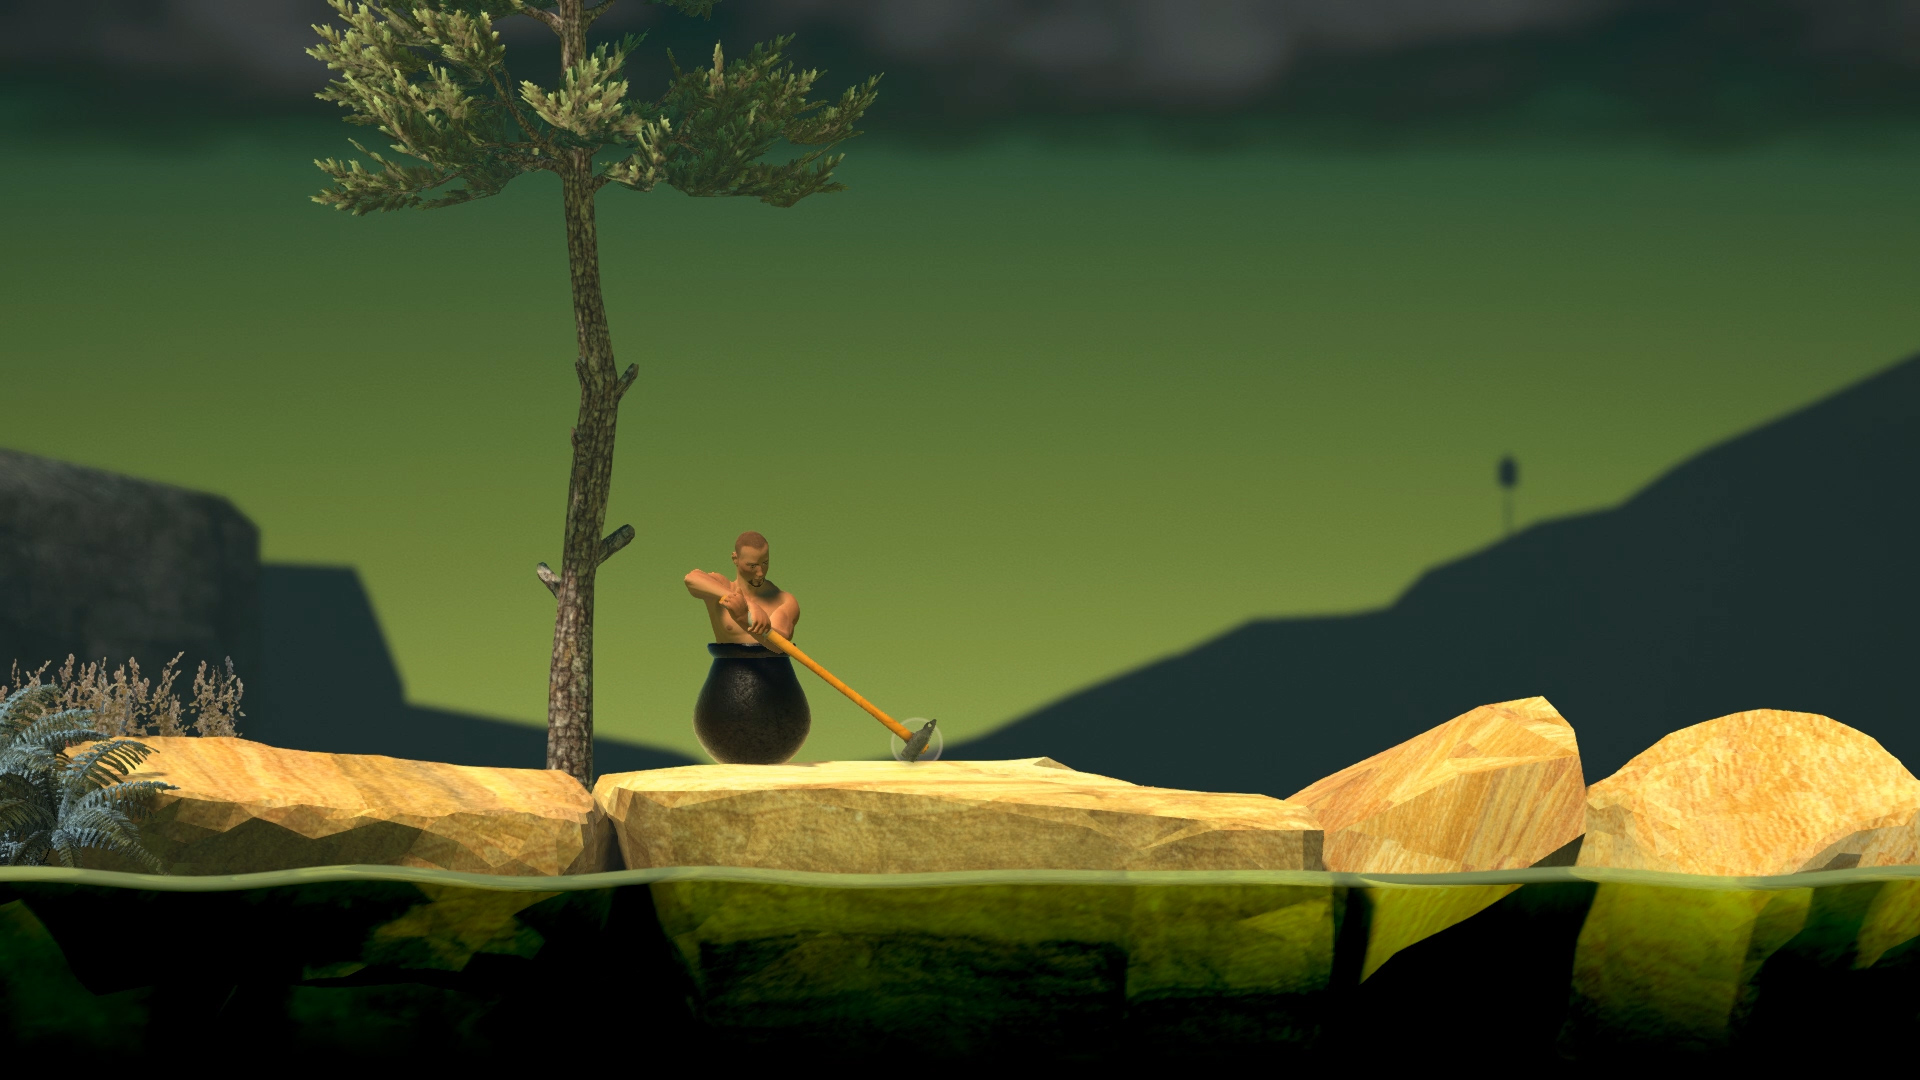 Getting Over It Is A Game About Using A Sledgehammer To Climb A Mountain